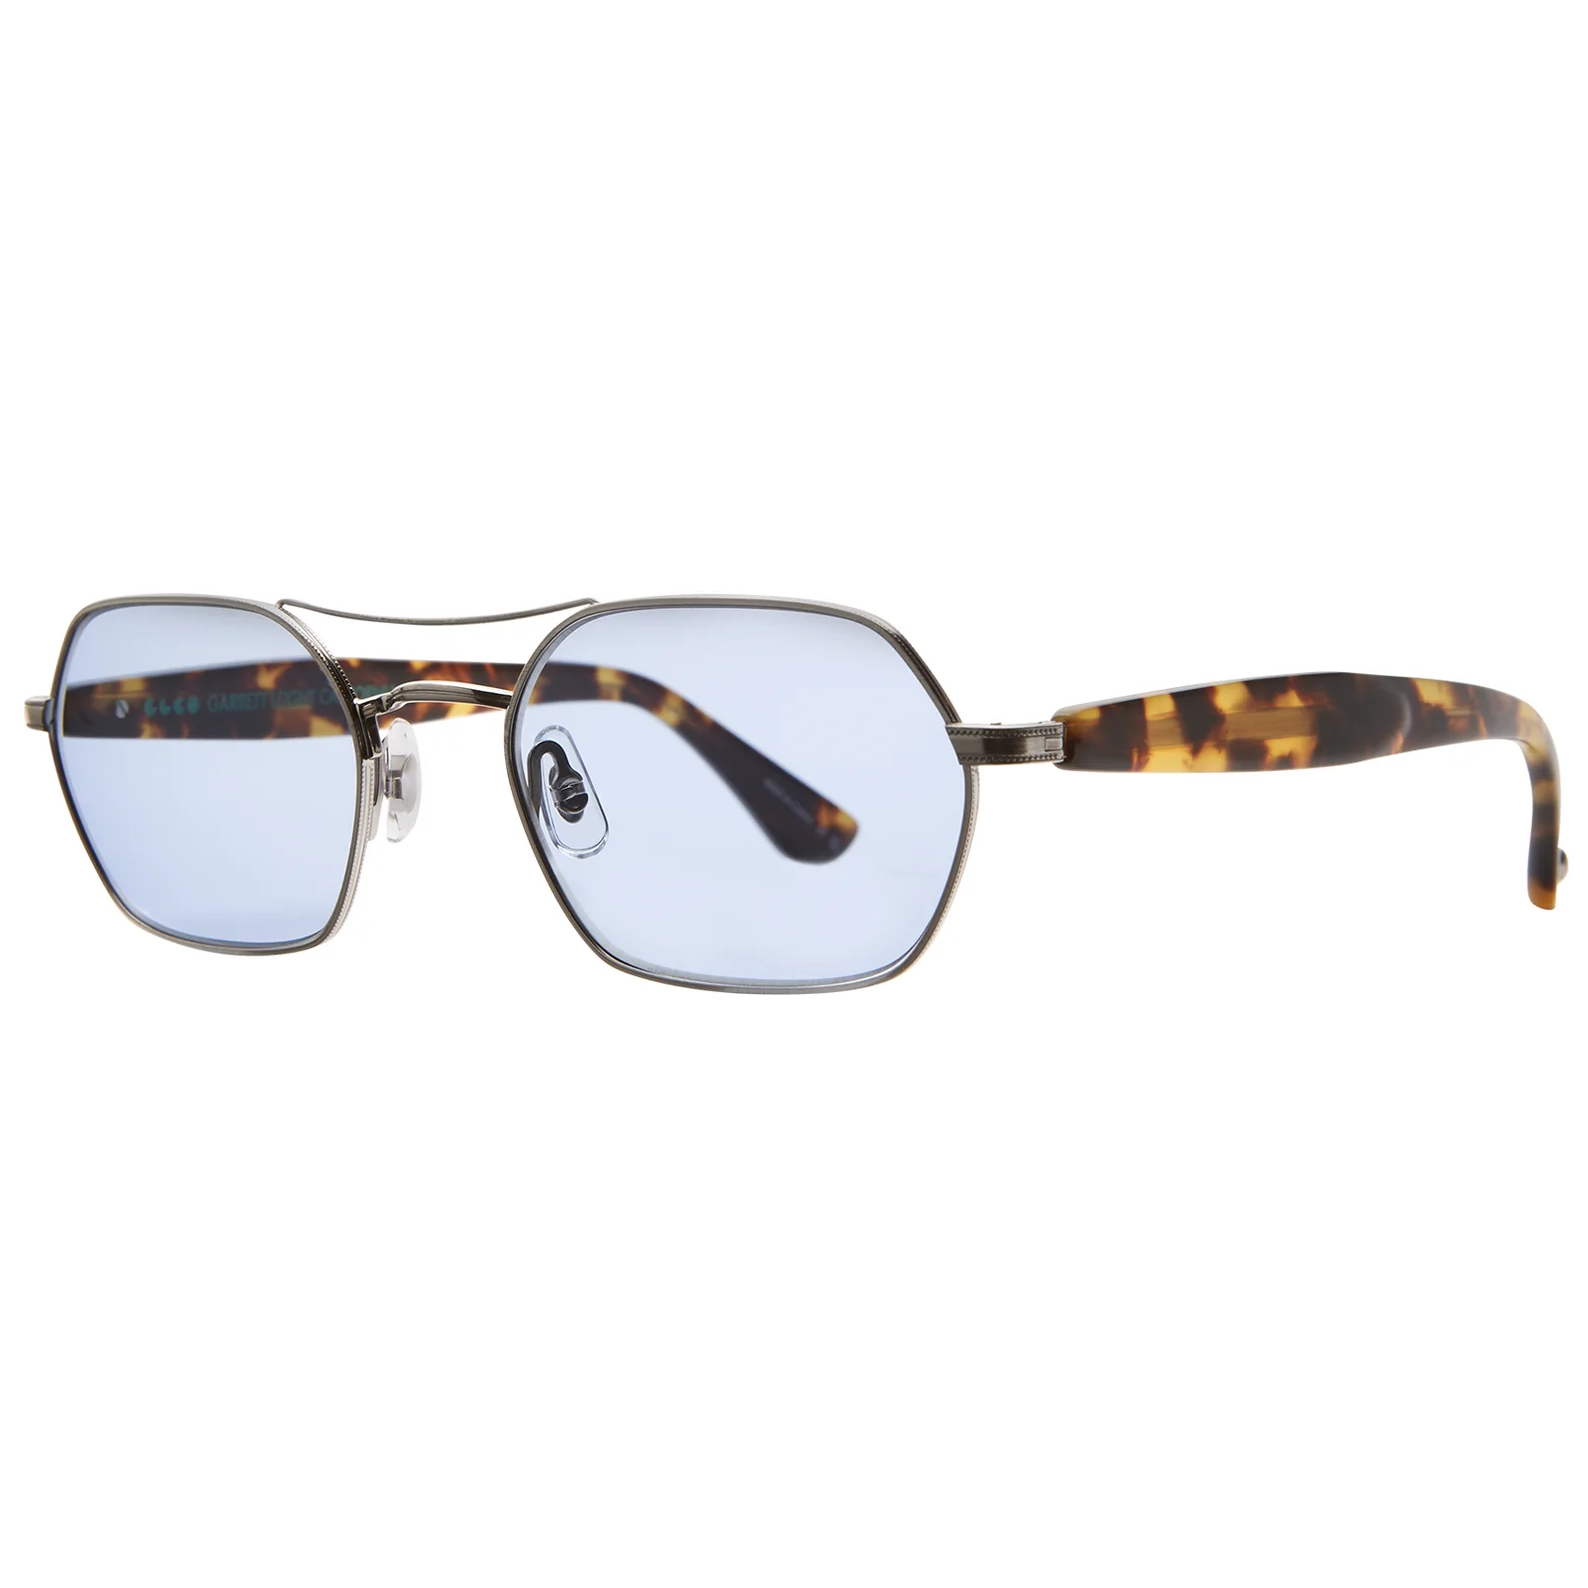 Garrett Leight - &quot;GOLDIE&quot; Sunglasses in Brushed Silver/Bio Spotted Tortoise Frames w/ Pacifica Lenses